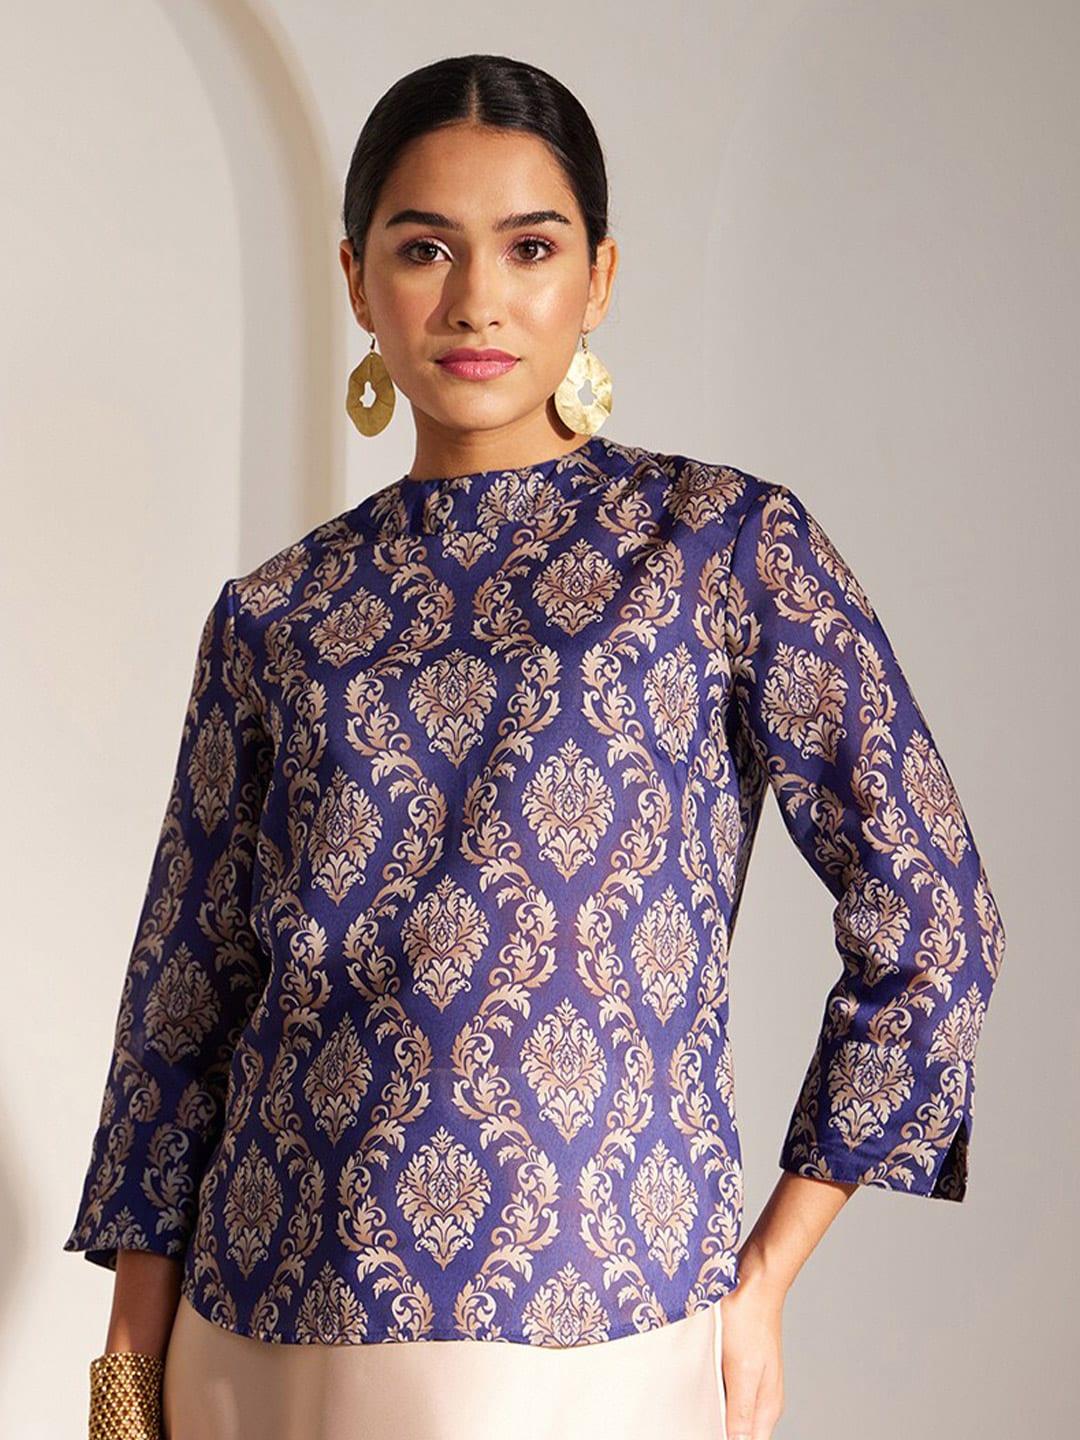 FableStreet Ethnic Motifs Printed Top